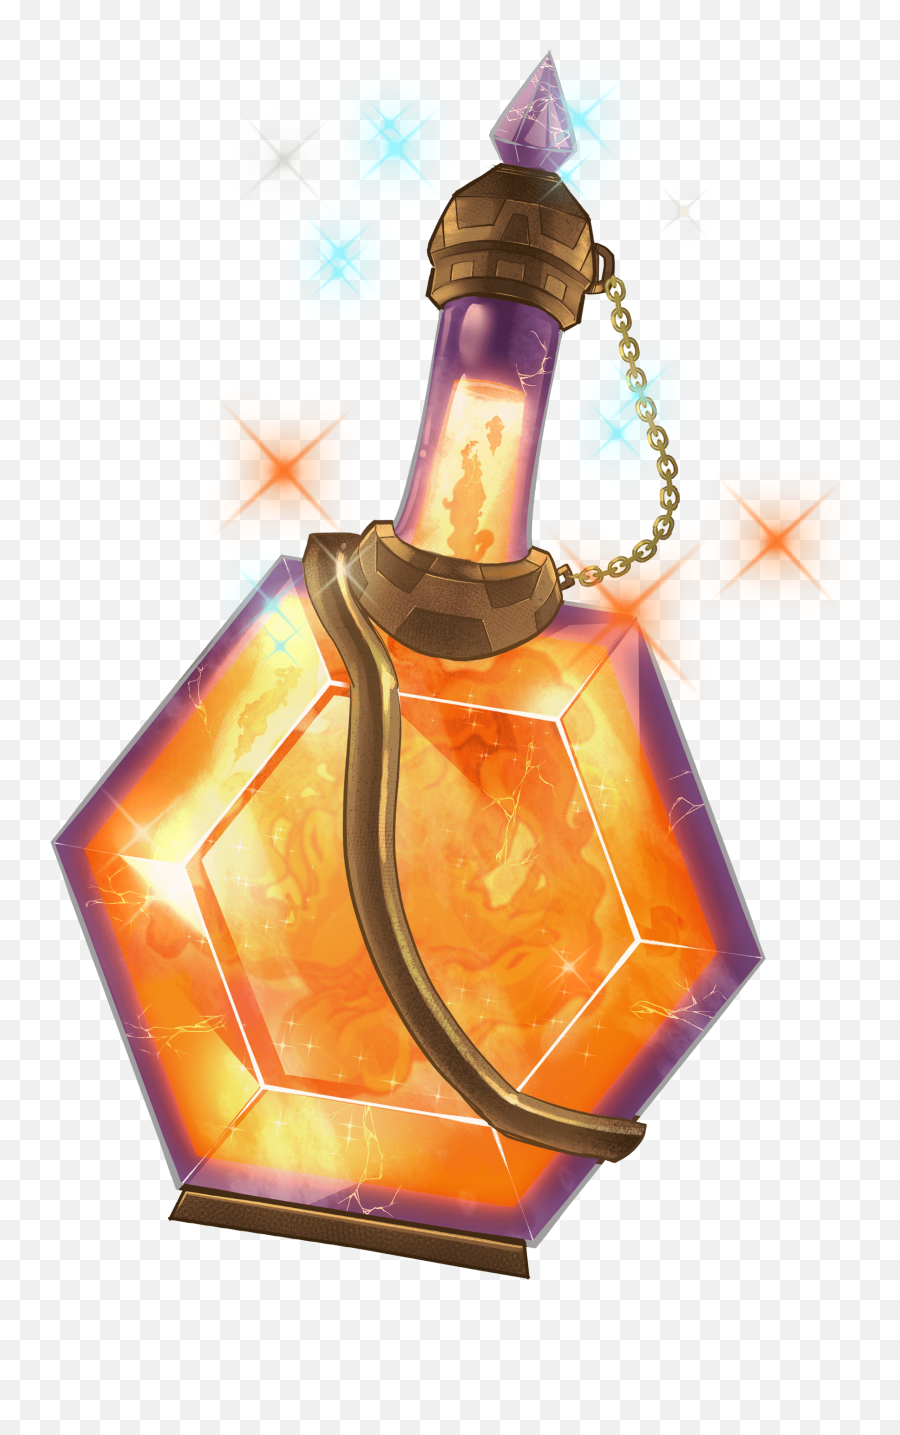 Fighting Mode Demo Presented By Etna Network - Bottle Stopper Saver Png,Mana Potion Icon